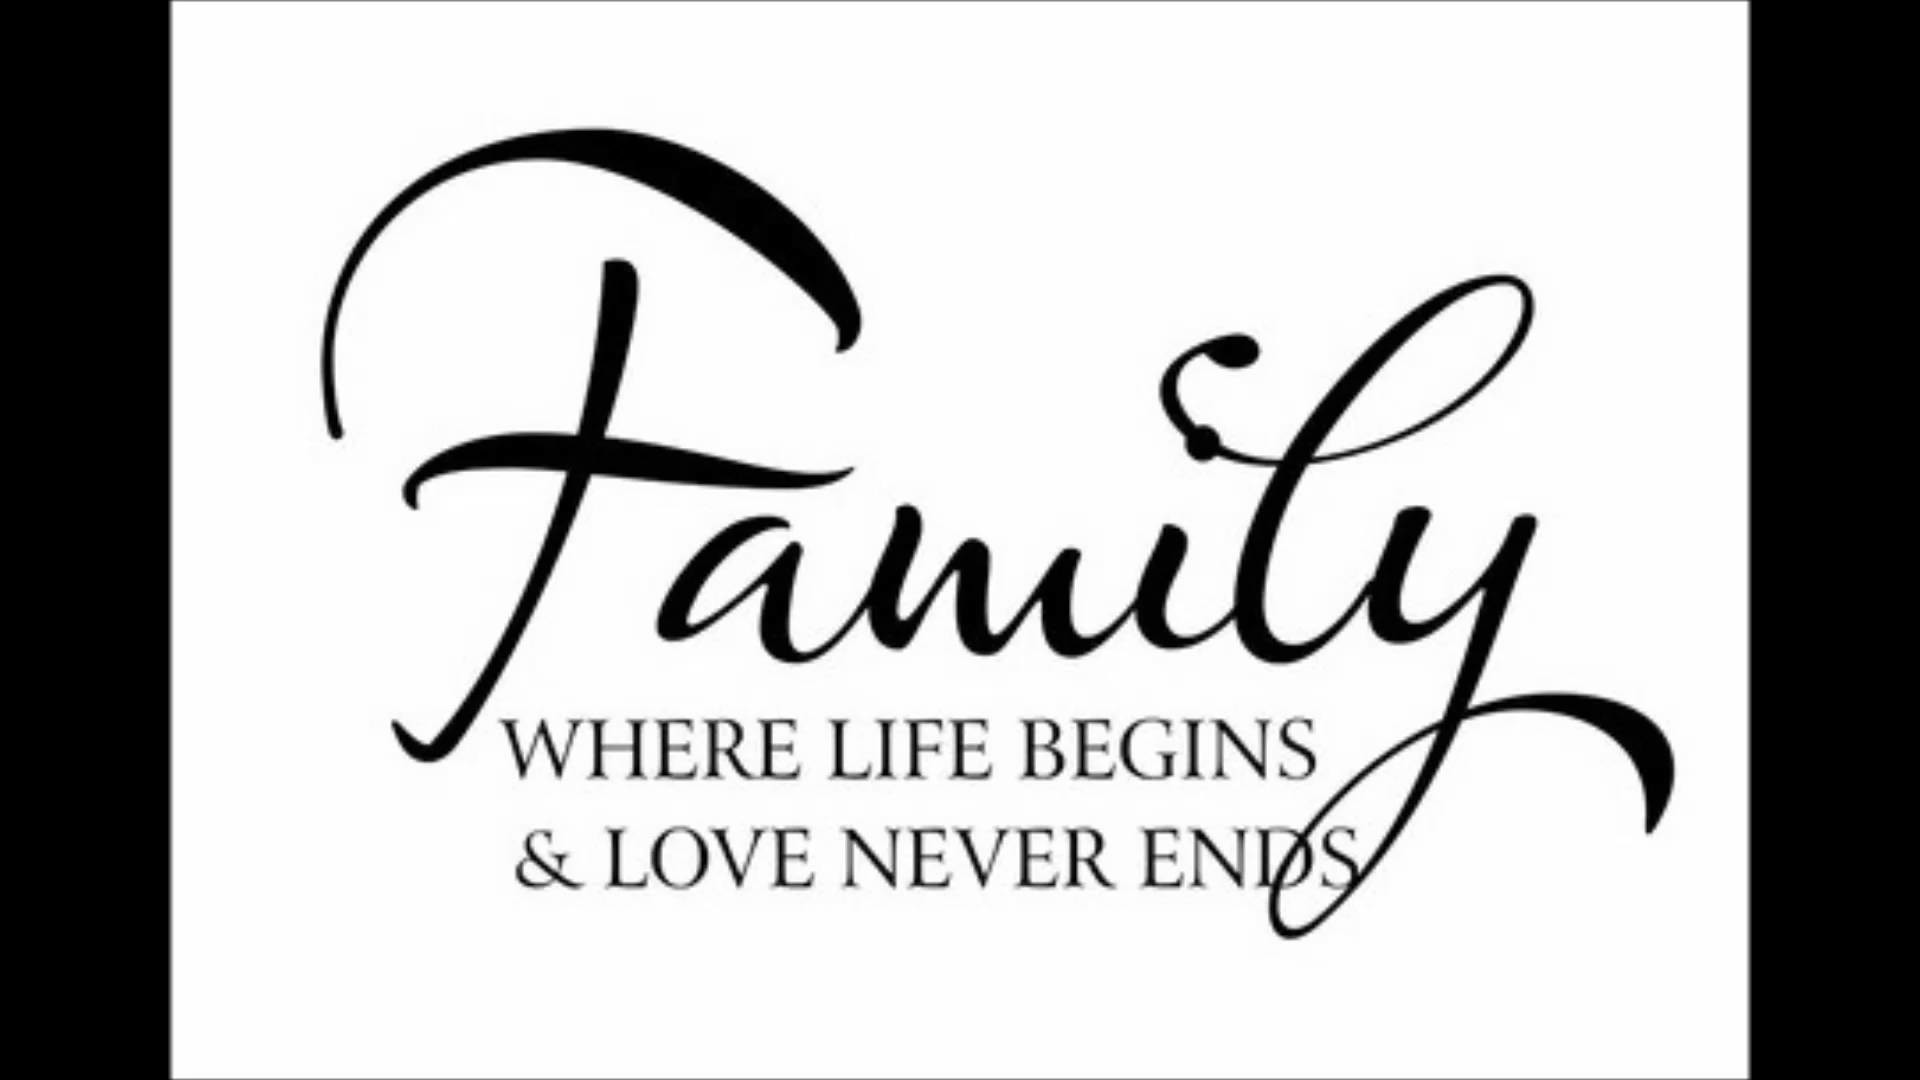 Love My Family Images Wallpapers